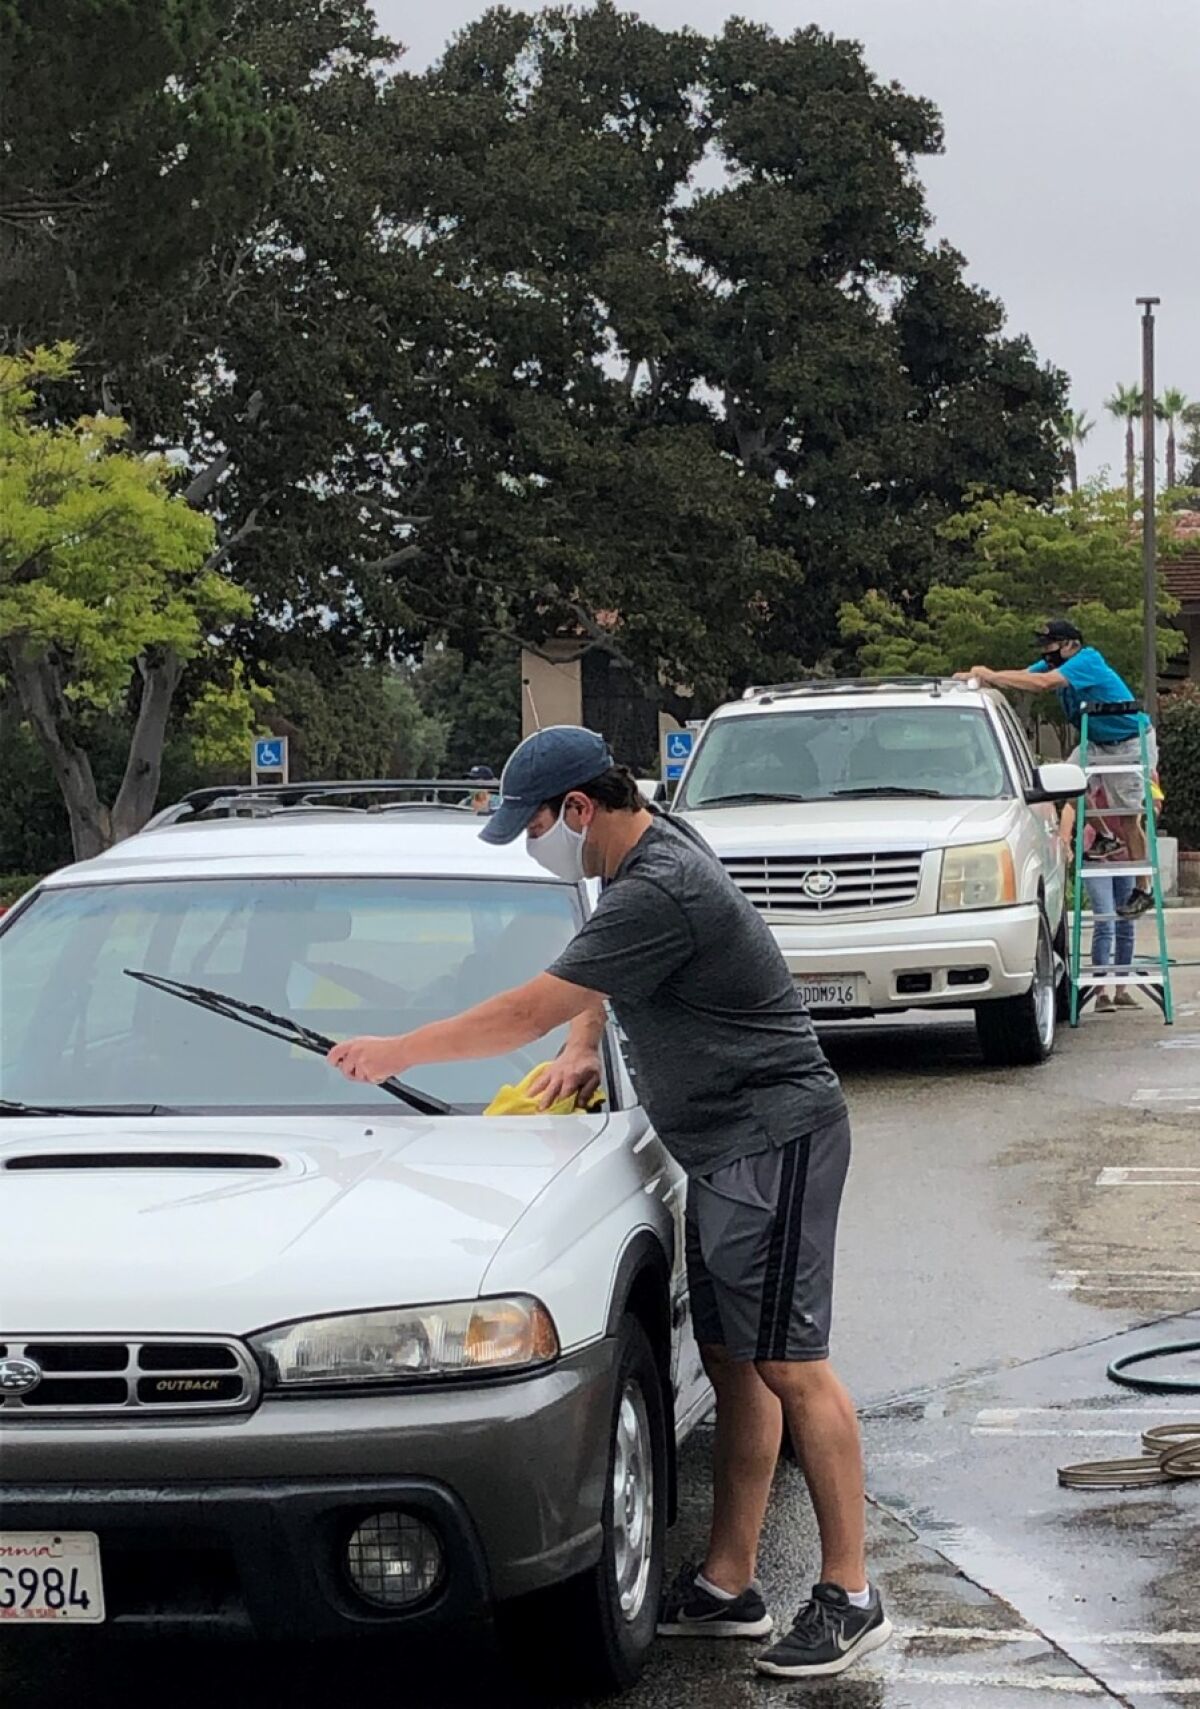  Car wash and drive-thru collection for homeless veterans 